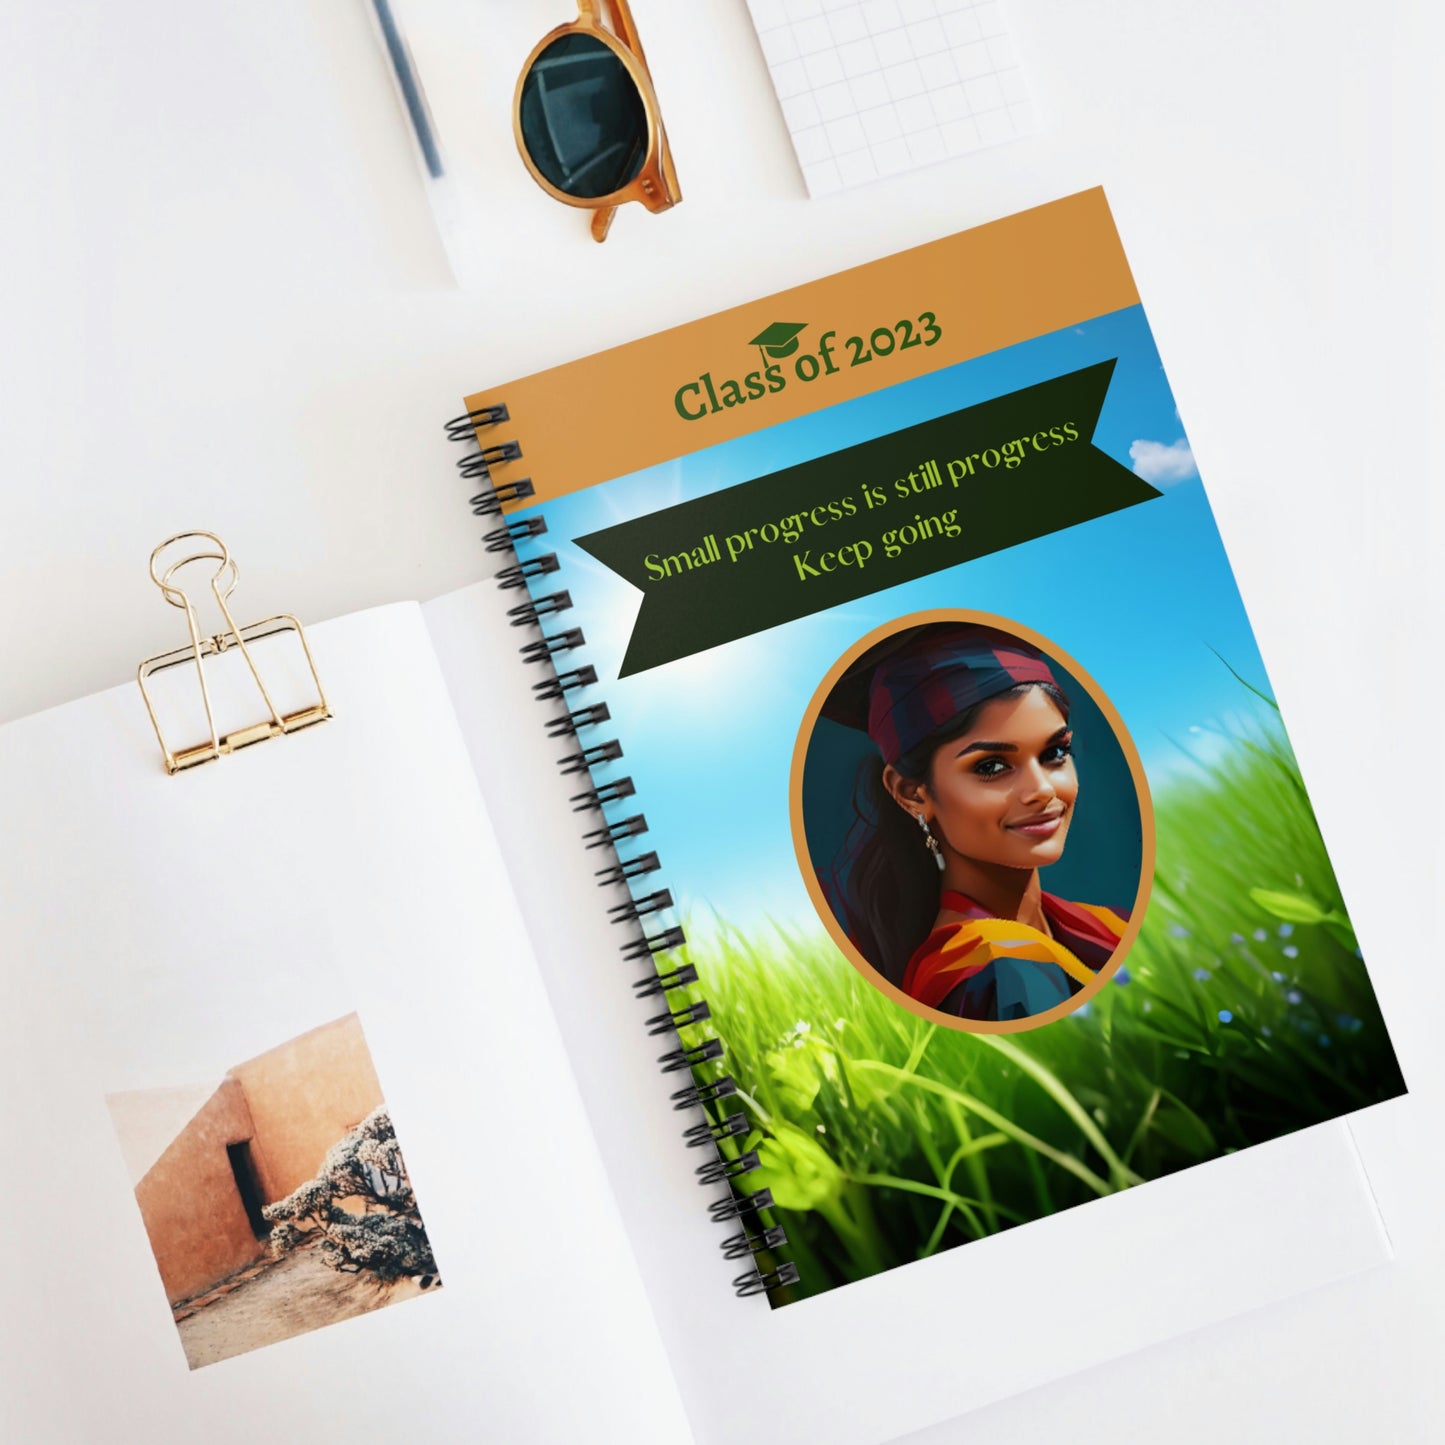 Class of 2023 Graduate Journal - (Indian Young Lady 2) - Ruled Line